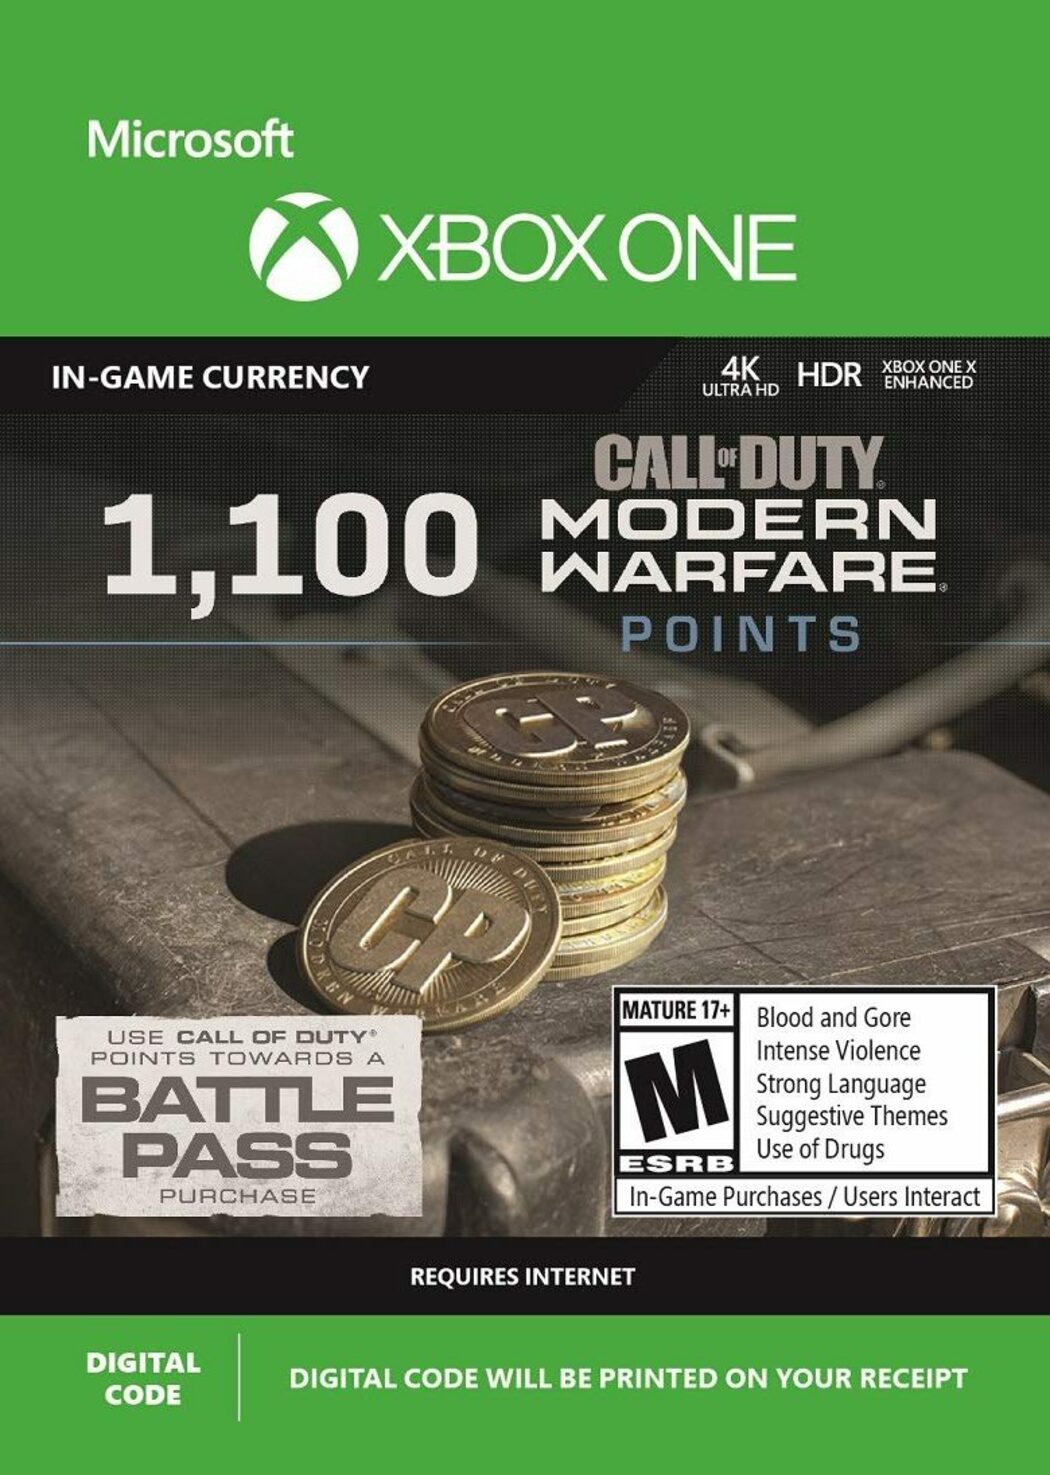 xbox points card